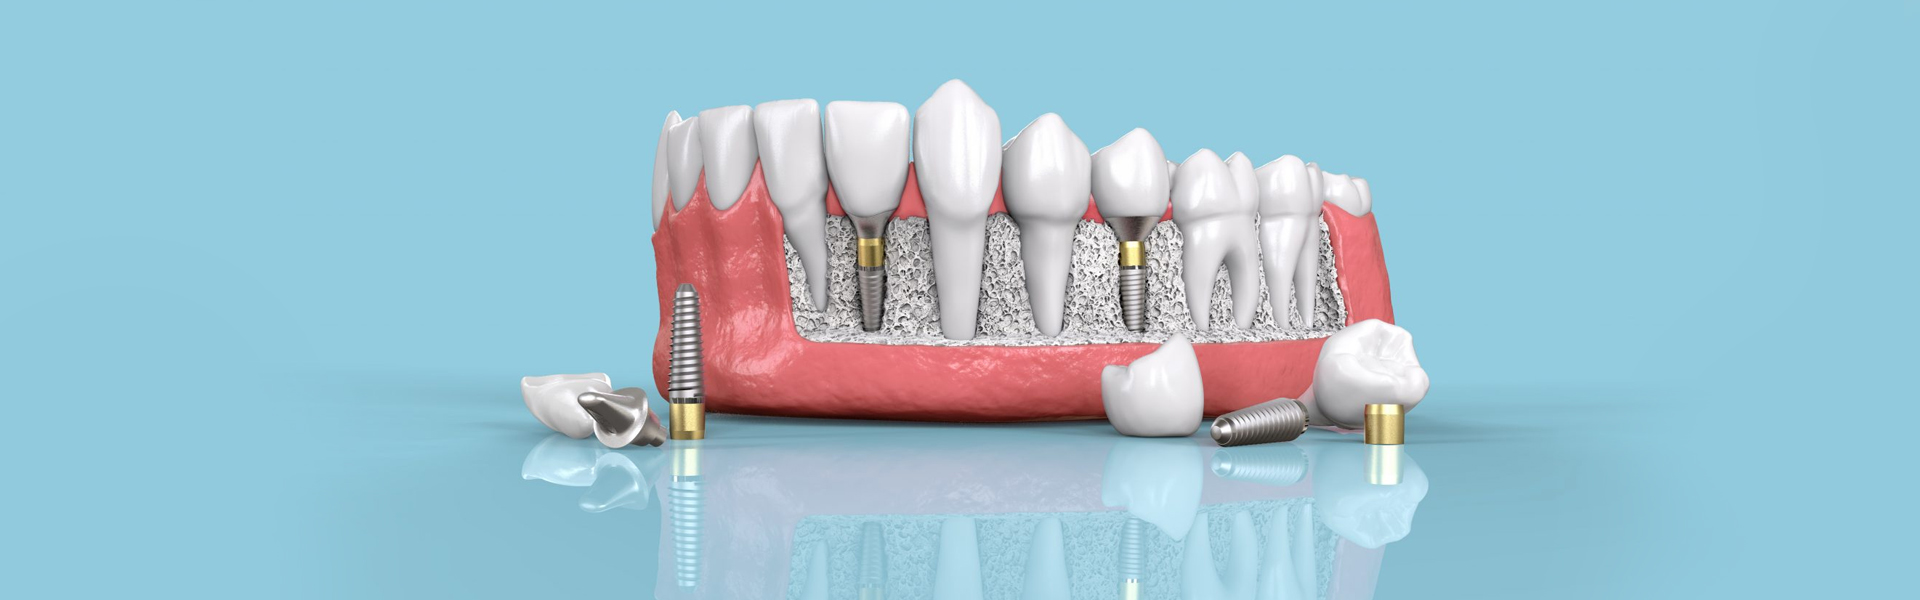 Dental Implant Procedure: Your In-Depth Step By Step Guide